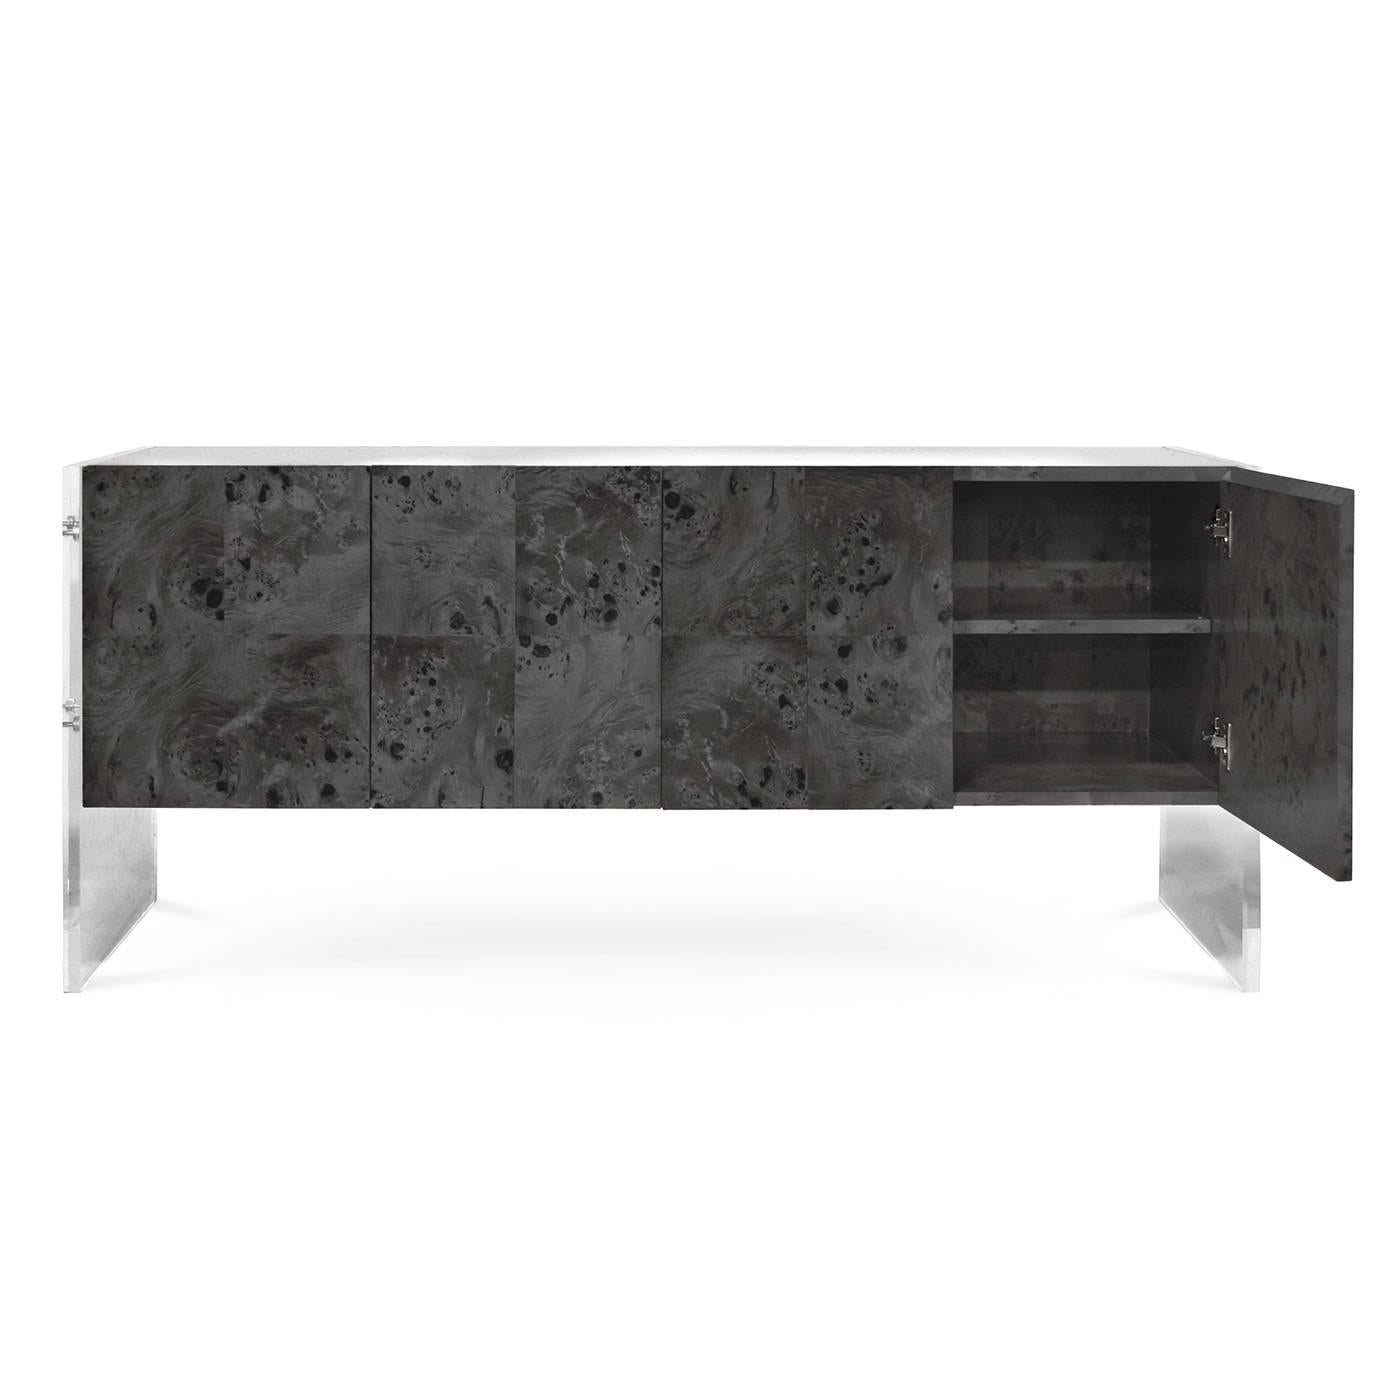 Timelessly chic. A Minimalist world of burled wood, Lucite, and stainless steel. Pieced lindera wood floats between Lucite legs with stainless steel accents. Pieced veneer cabinet faces showcase naturally occurring patterns in the wood, and an